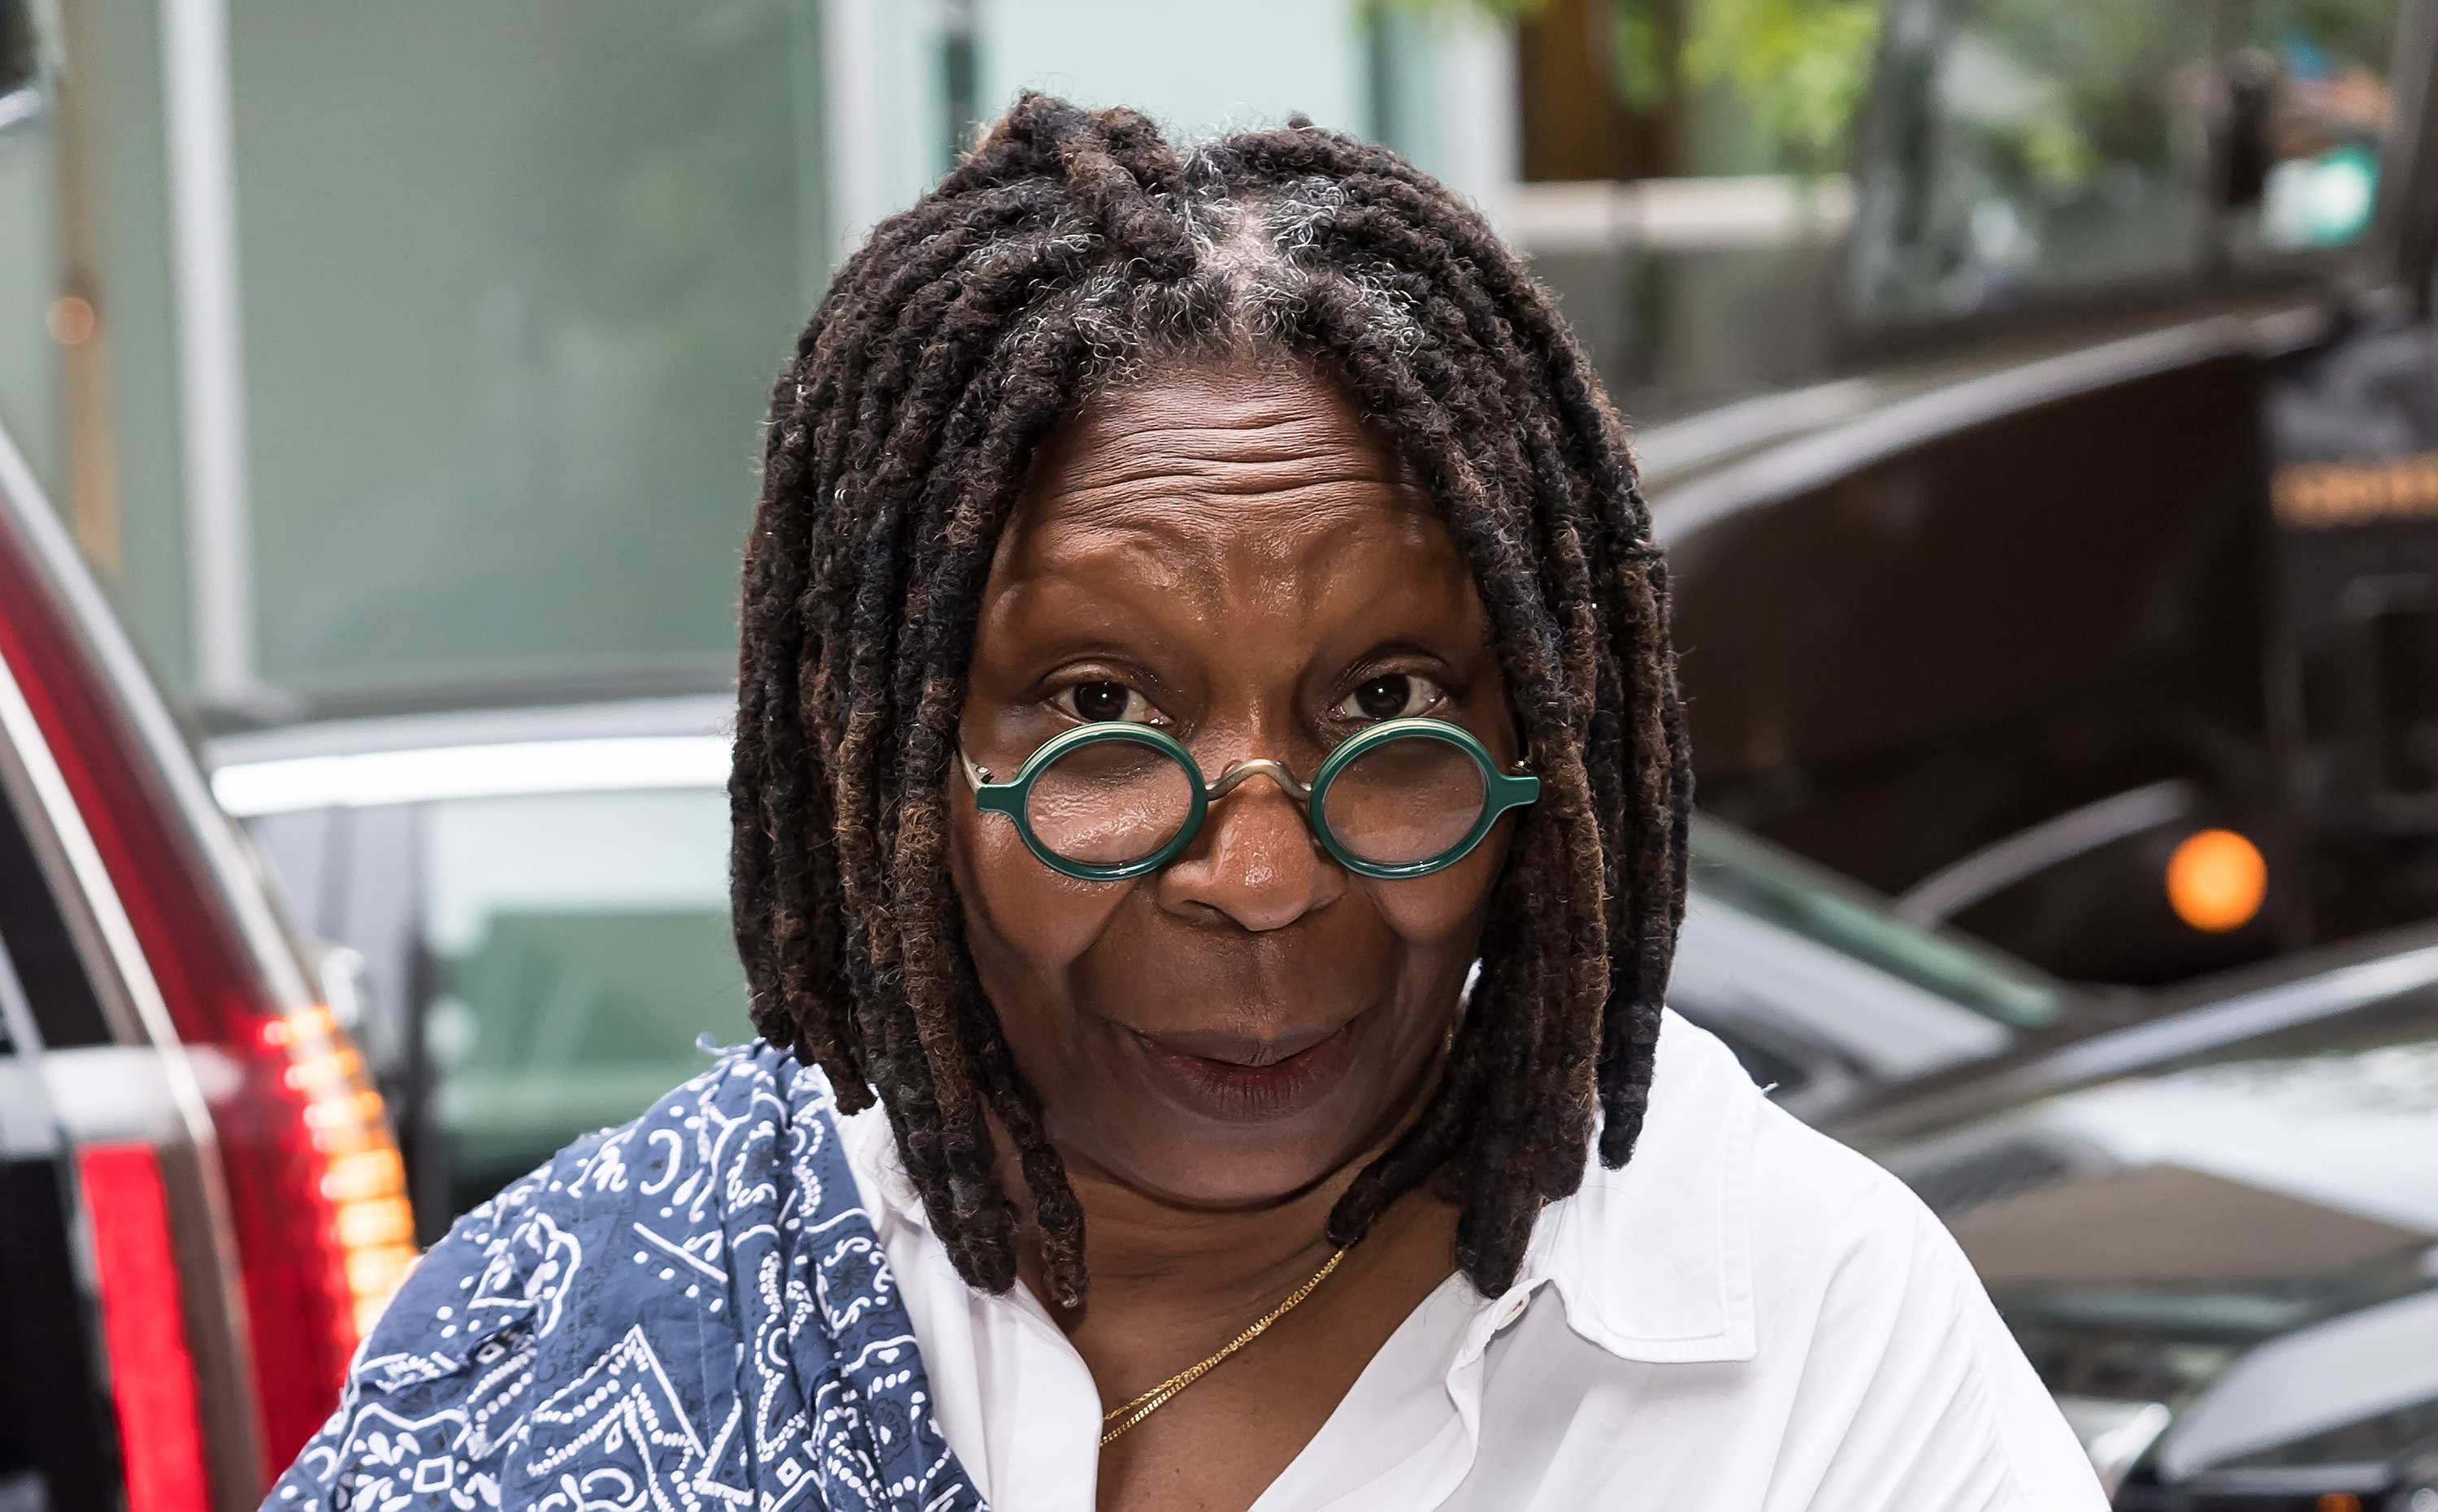 Whoopi Goldberg am 7. September 2018 | Quelle: Getty Images